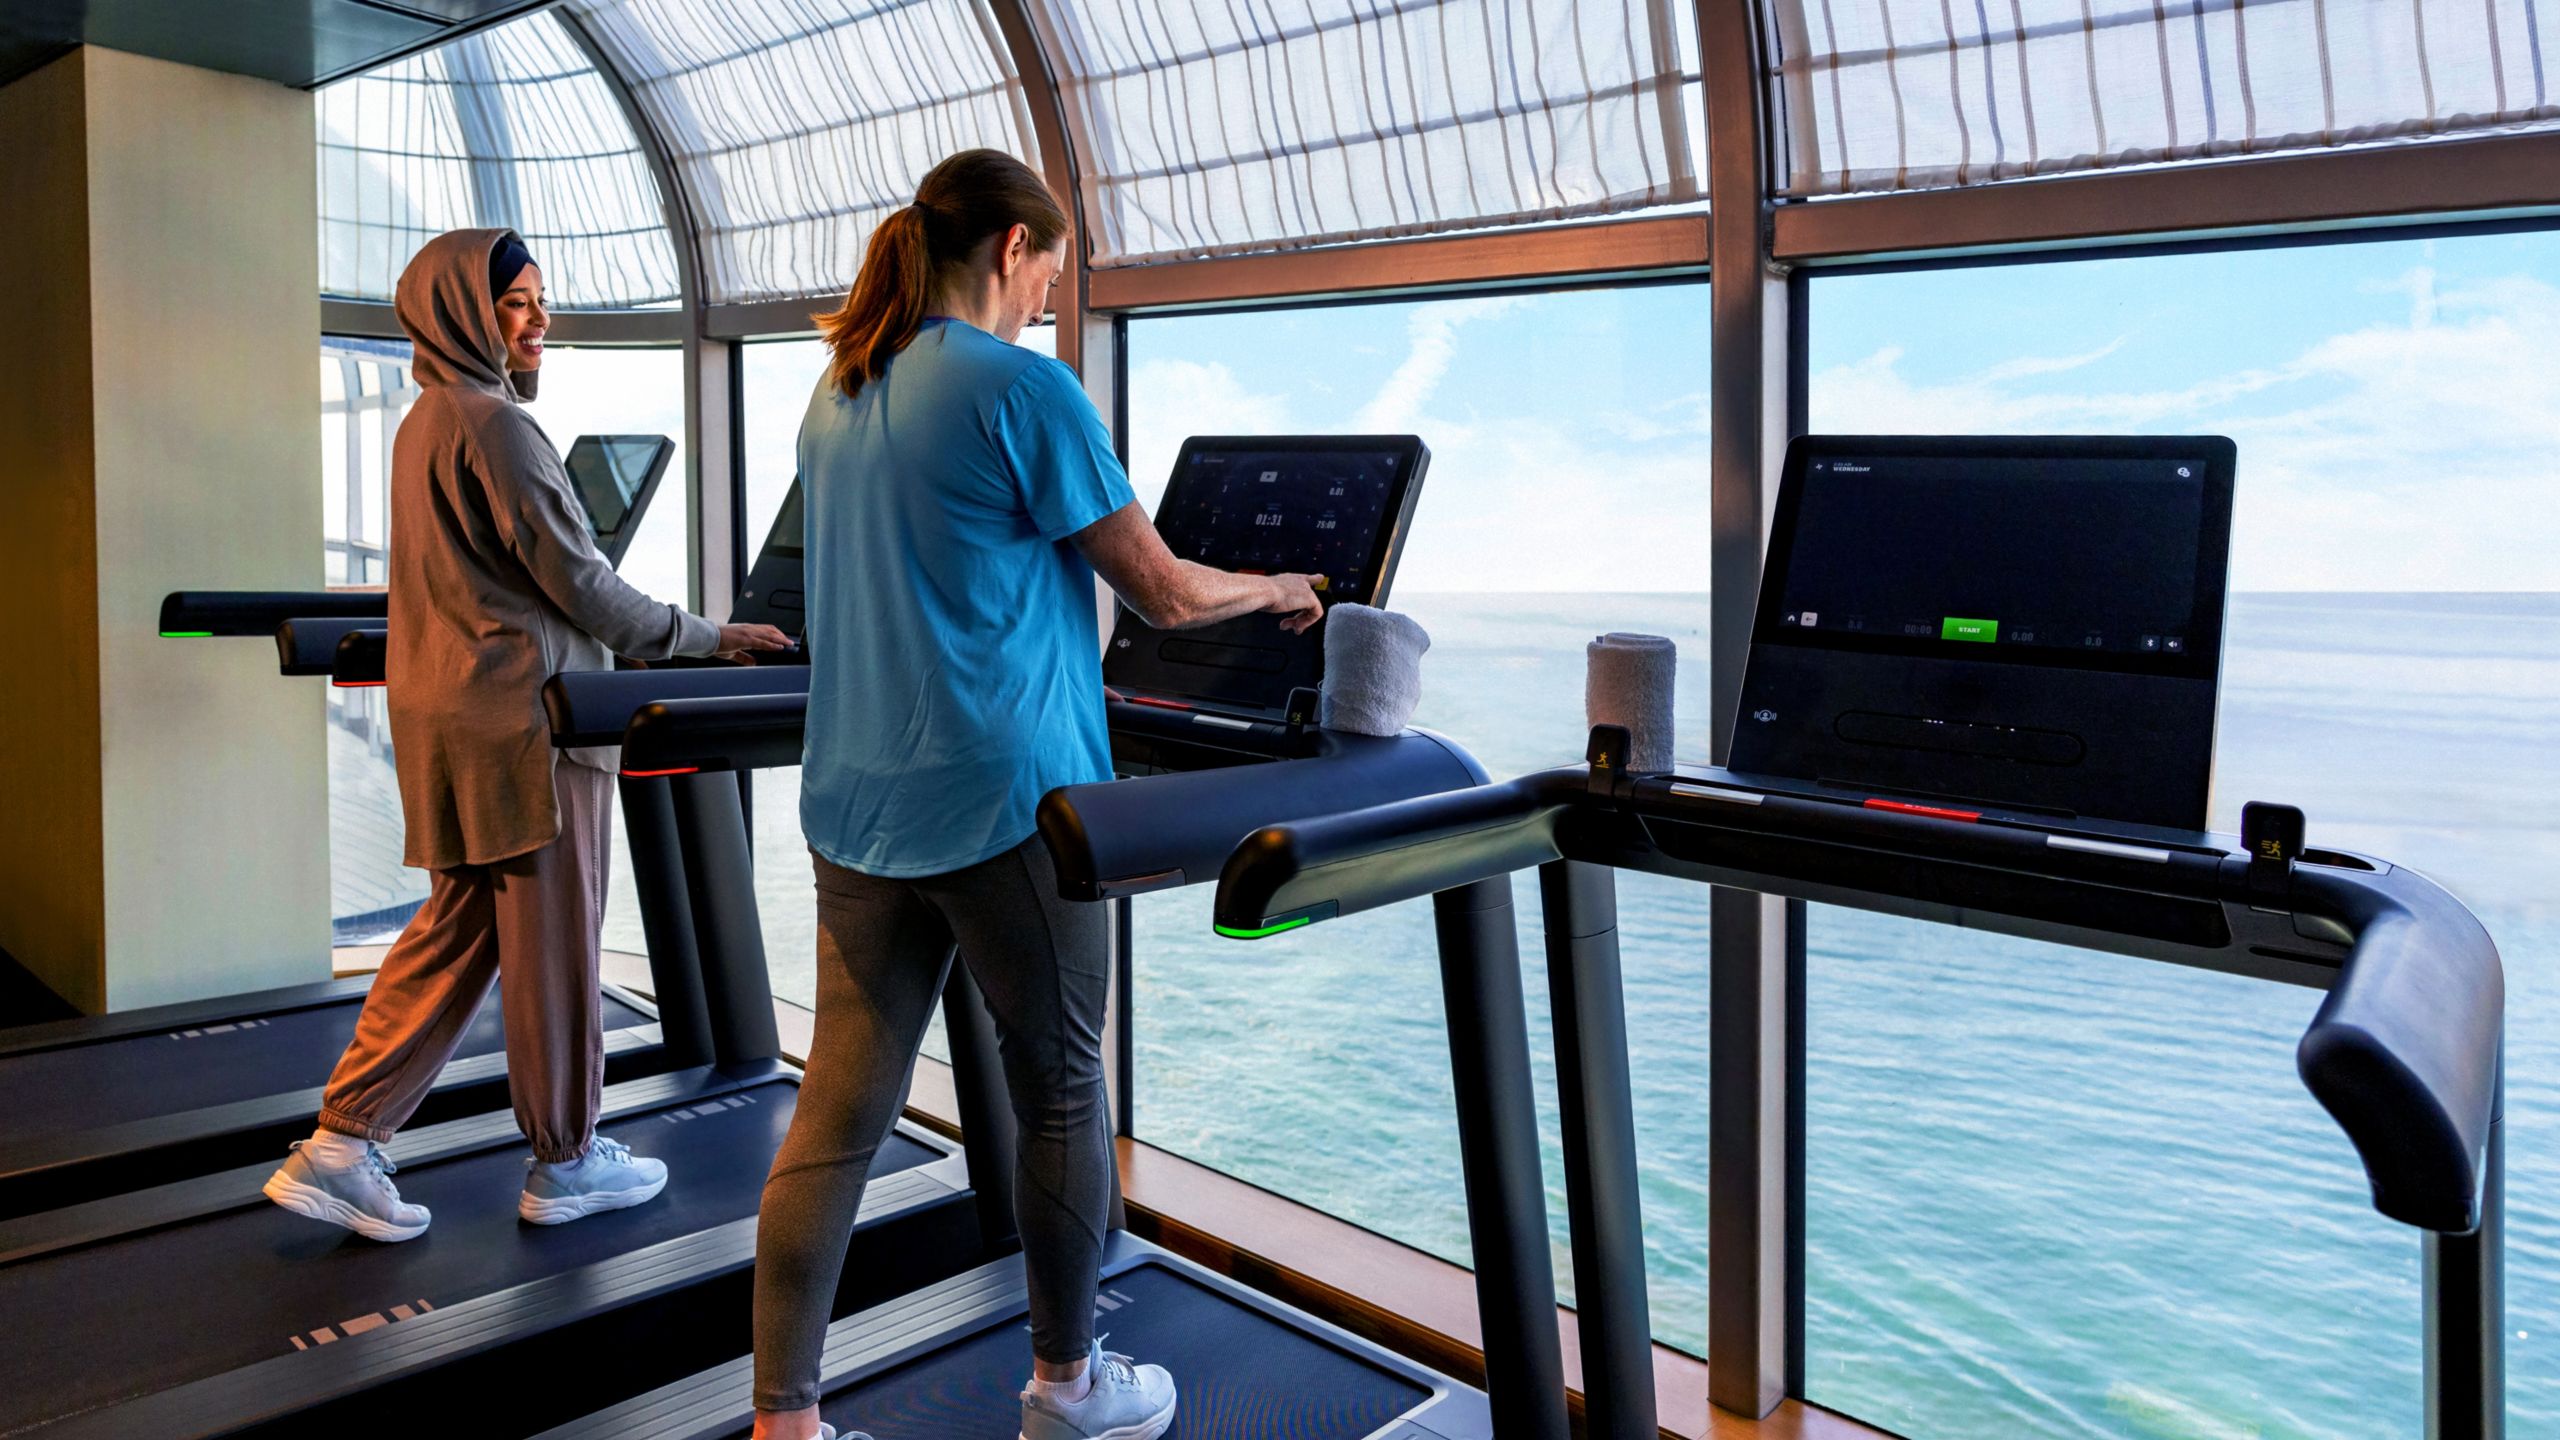 Two women walk on treadmills in a gym, with windows facing out to the sea